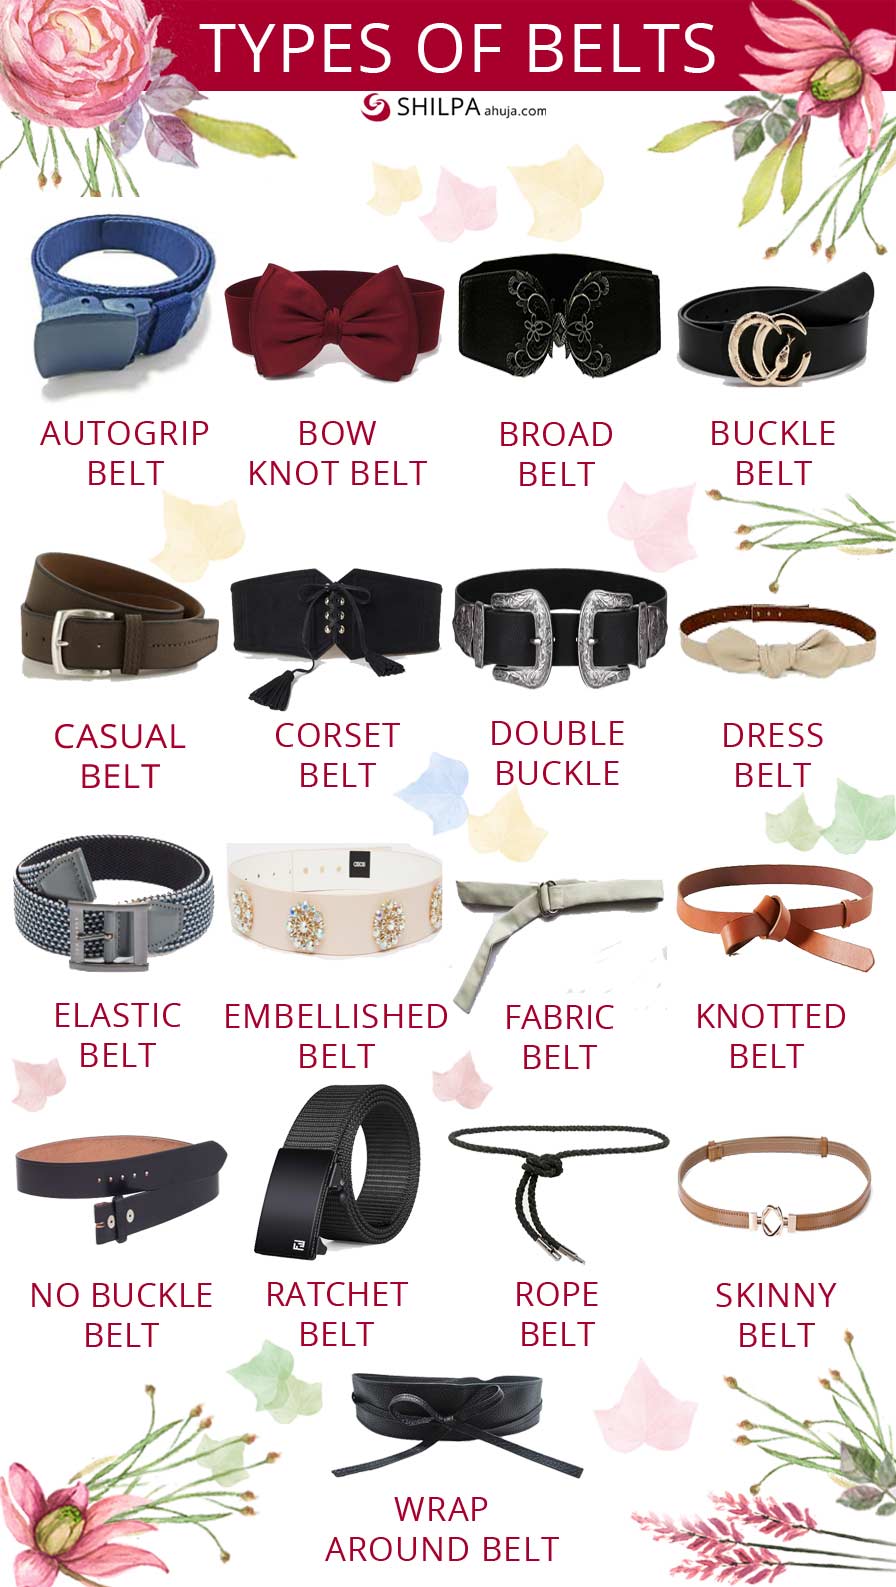 different-types-of-belts-fashion-words-glossary-dictionary-terms-infographic